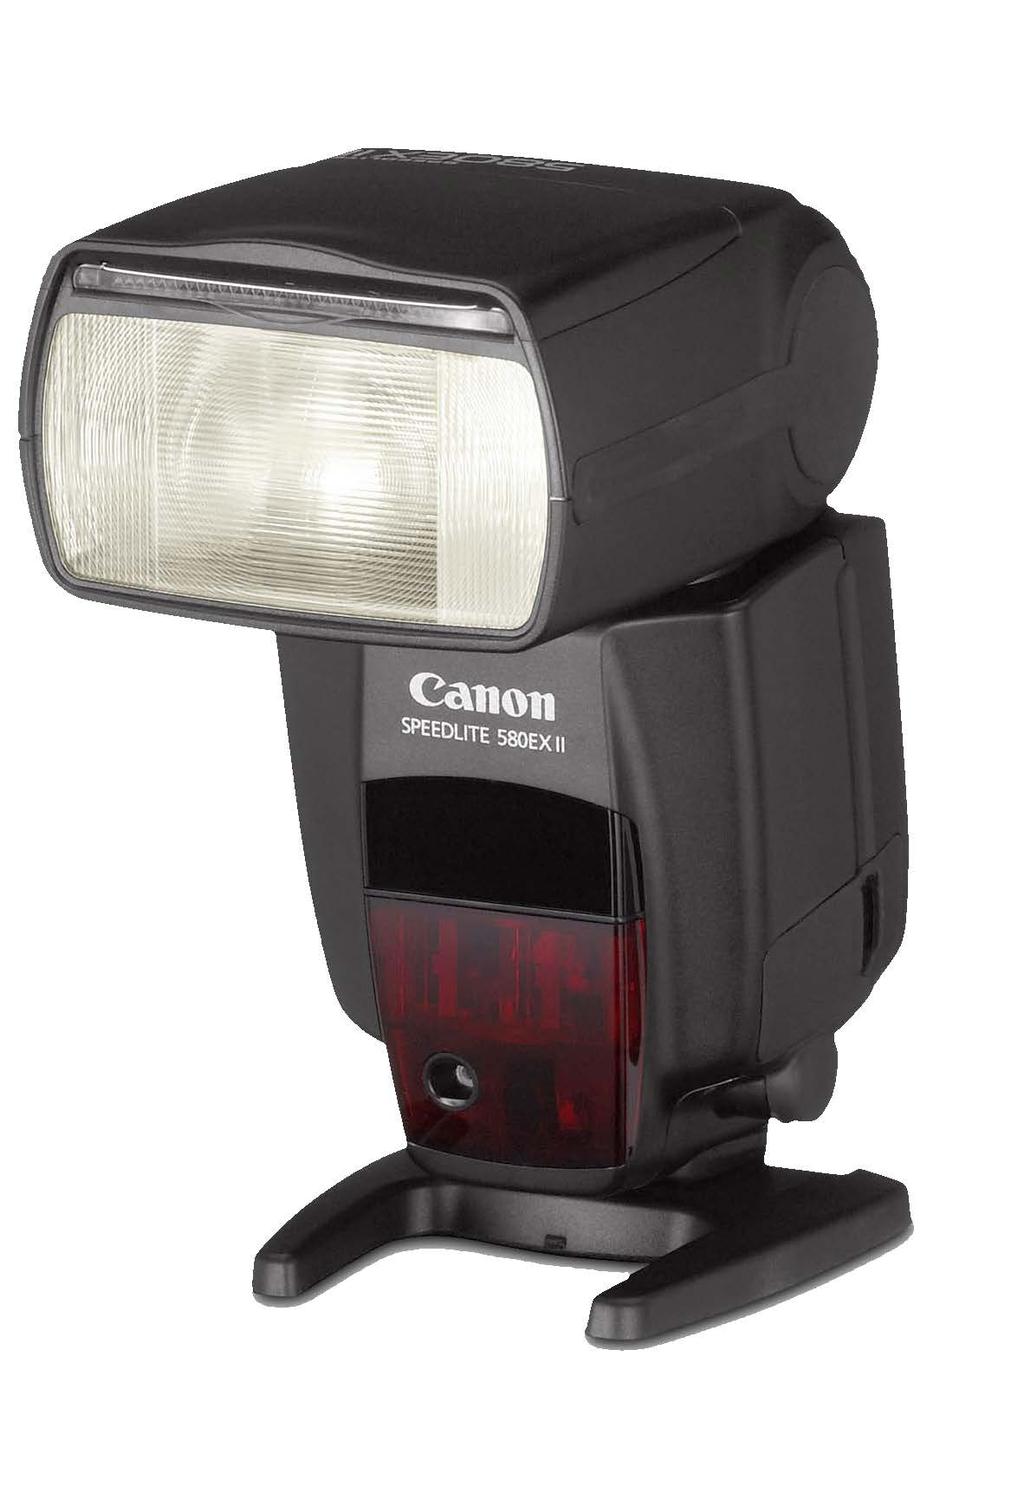 Chapter 1: Flash options within the EOS range 20 580 EX II flashgun Although this flash is now discontinued, it is still one of the most frequently seen models in use with Canon EOS cameras.